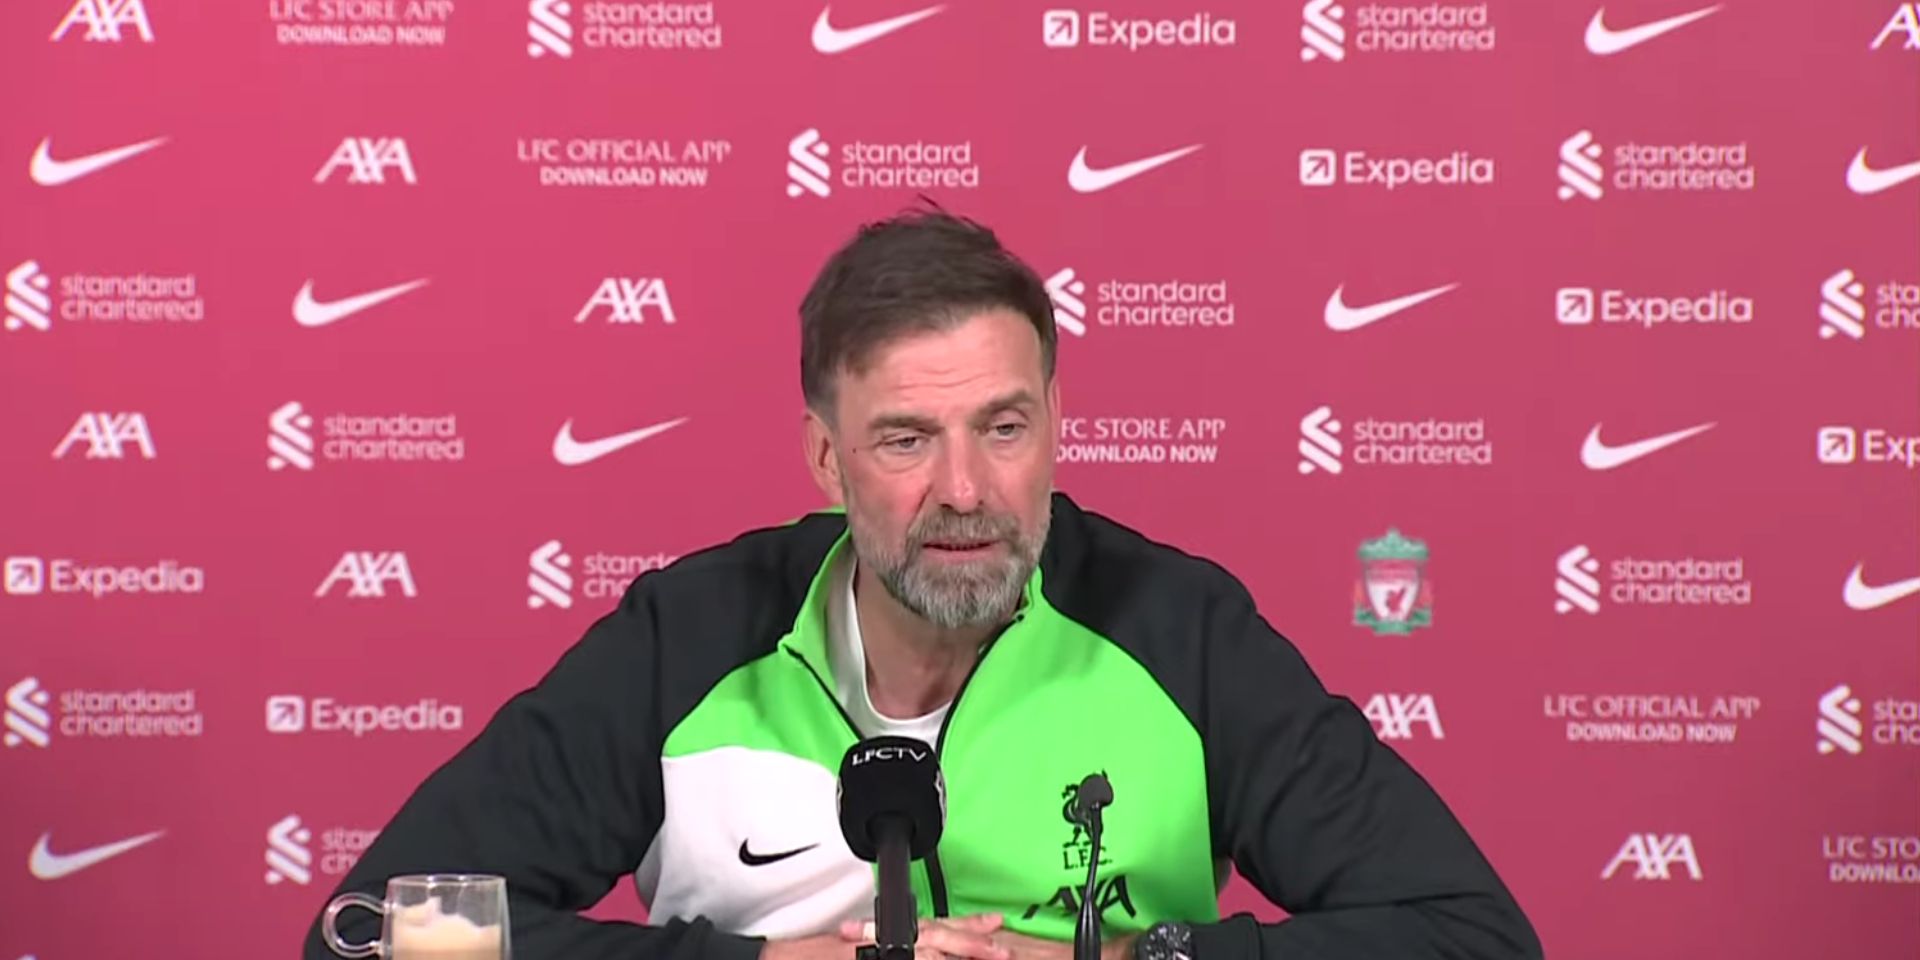 (Video) Klopp admits Liverpool have been ‘very tense’ and blames ‘super-intensive period’